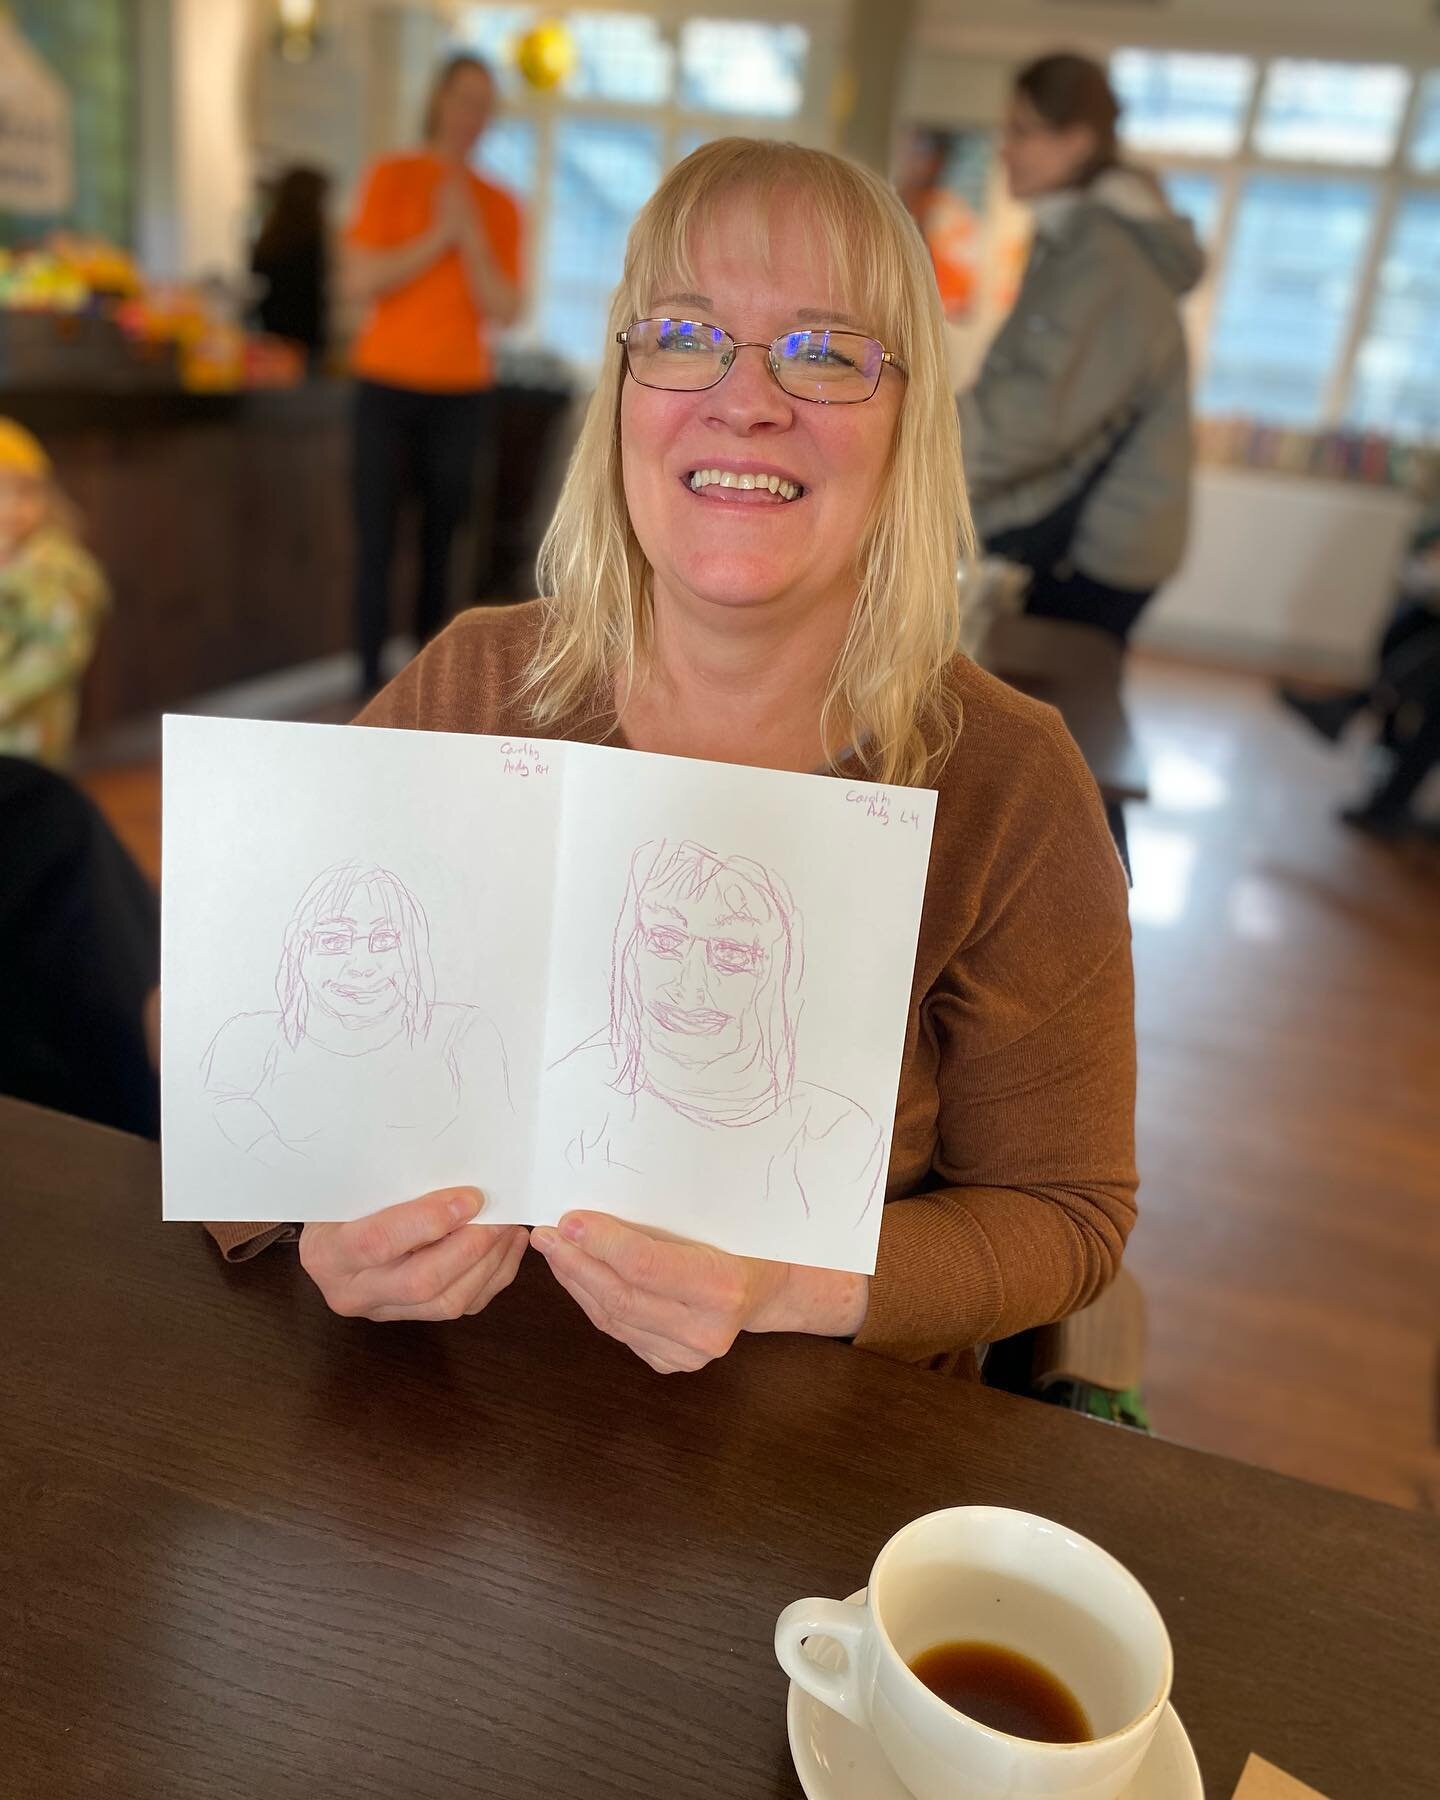 Great to see Carol (and the gang!) back at Art Club yesterday! There are only 3 more sessions before we take a break for easter-come down if you can! Wednesdays 1030-12ish. Free and open to all aged 18+ 
😃✏️☕️
Link in bio to book your spot!
🙌🙌🙌
#